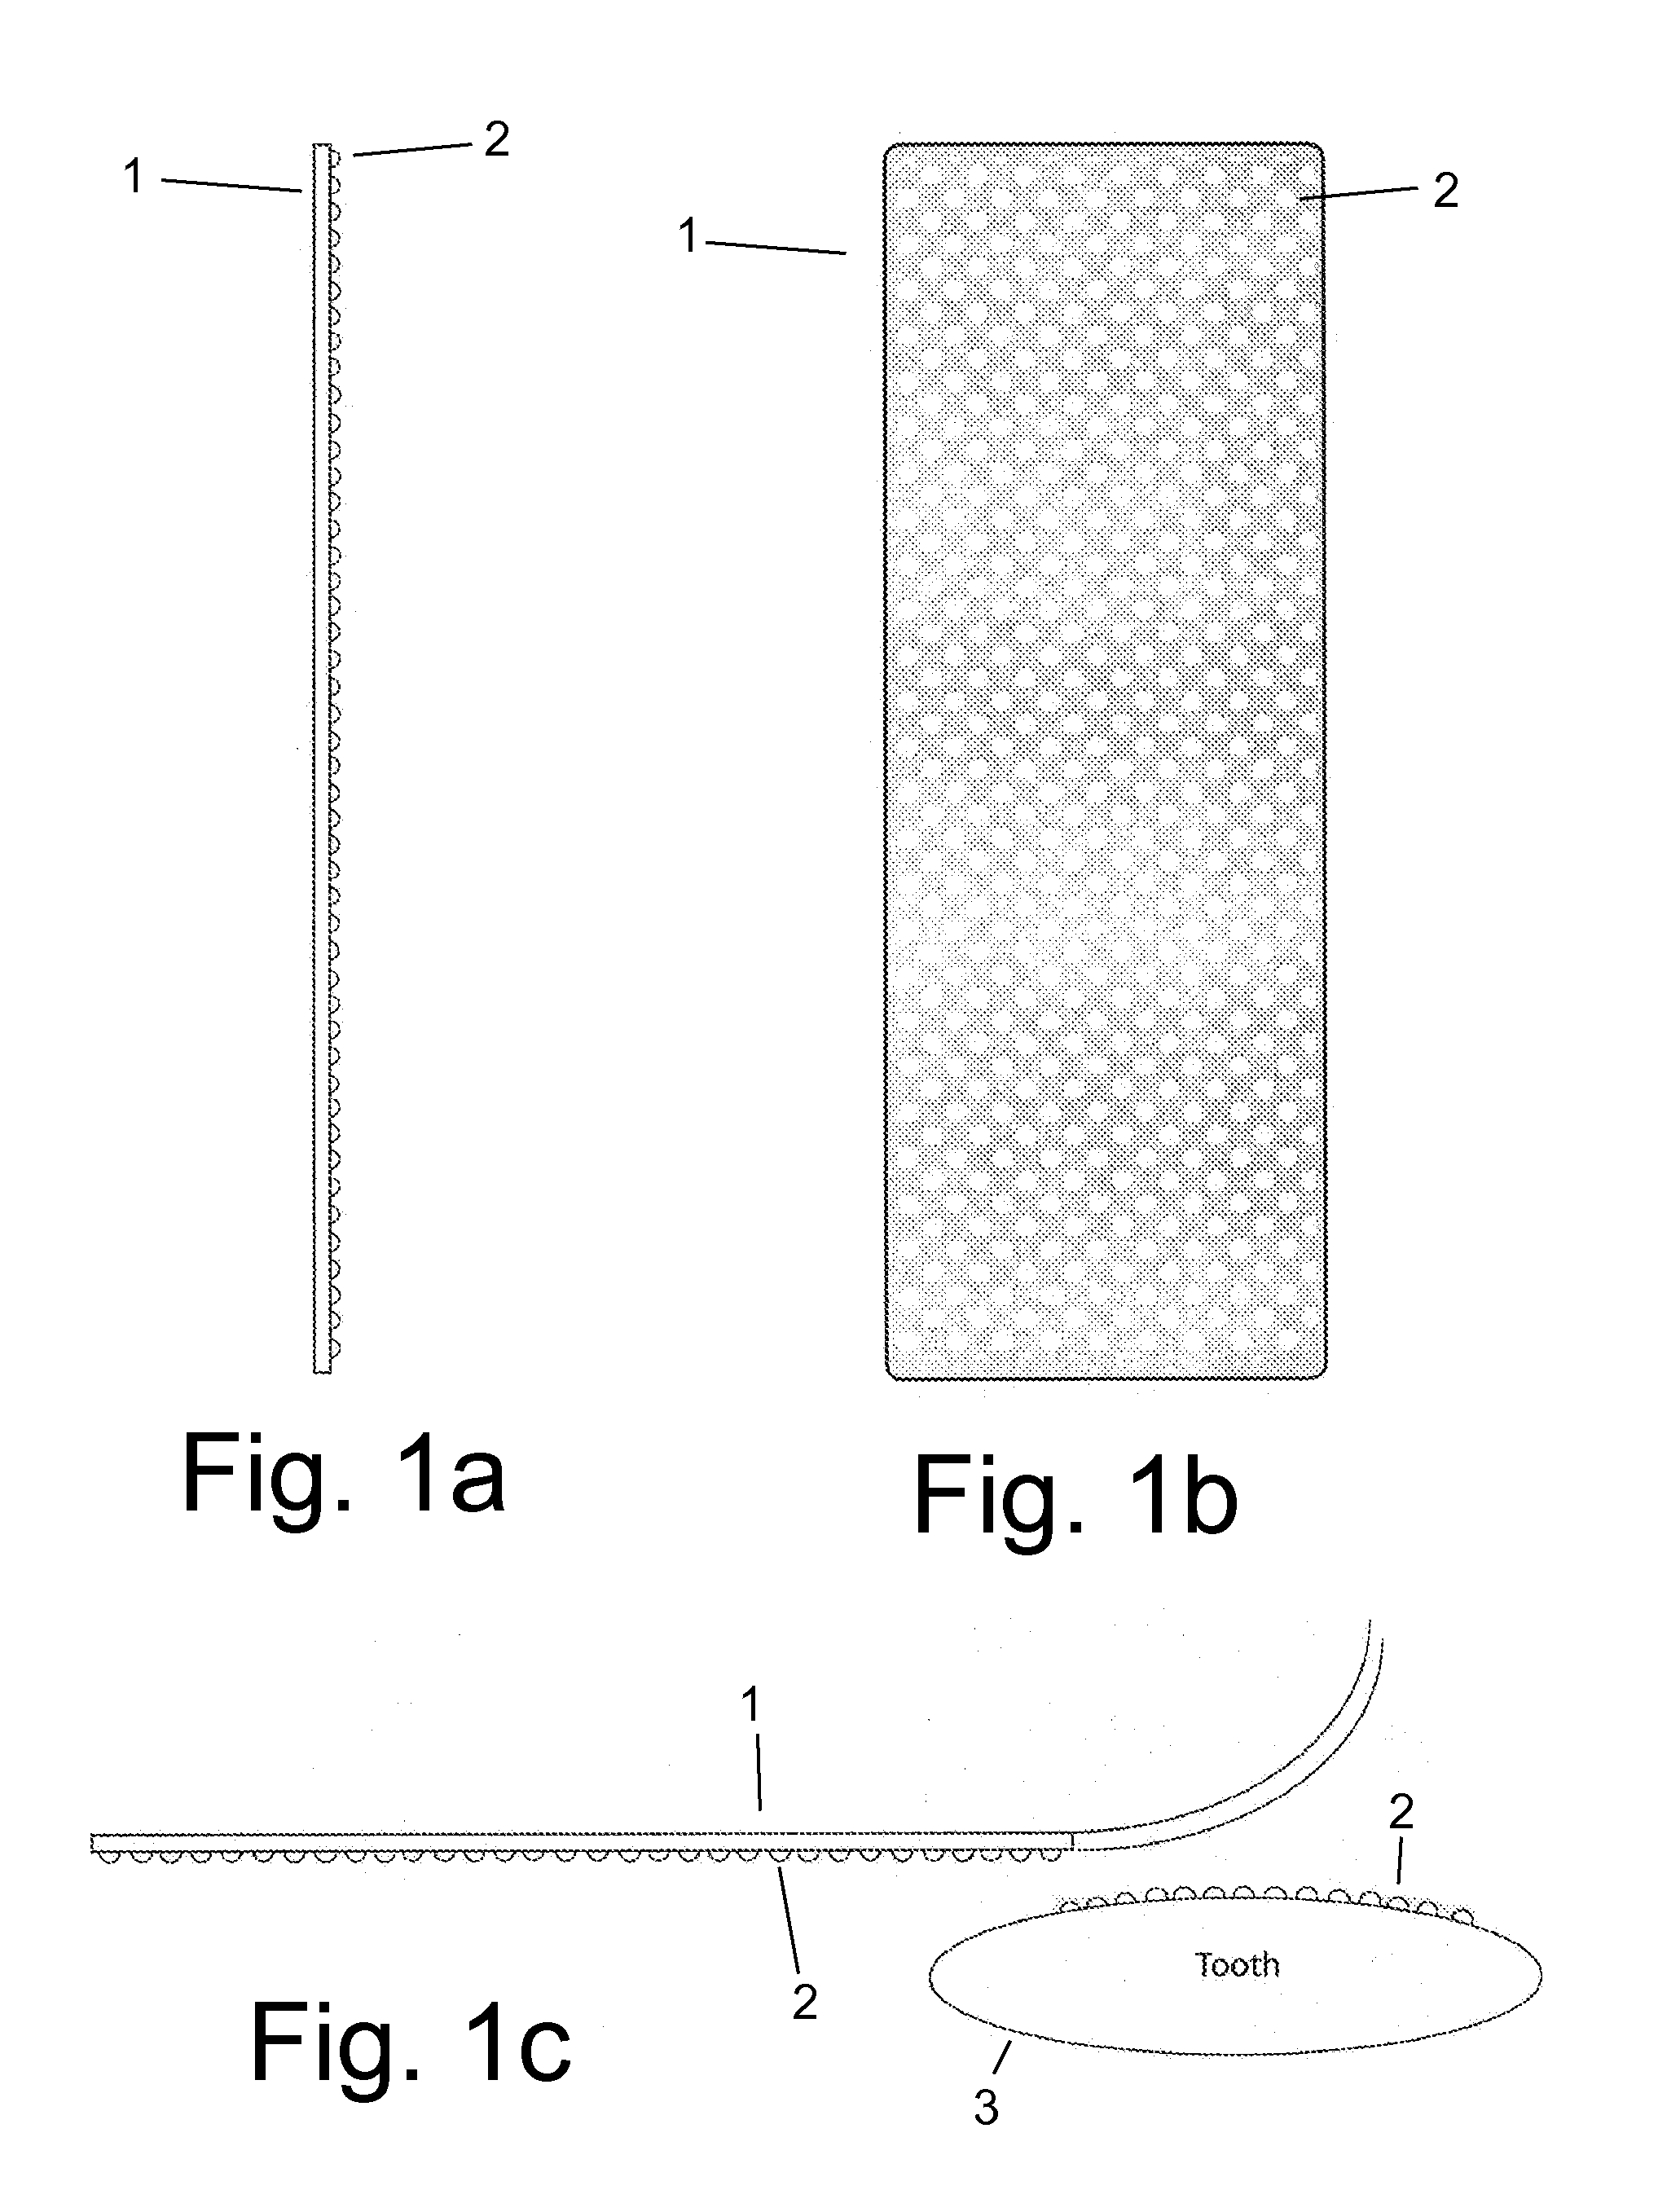 Strip for transferring a therapeutic composition to a tooth